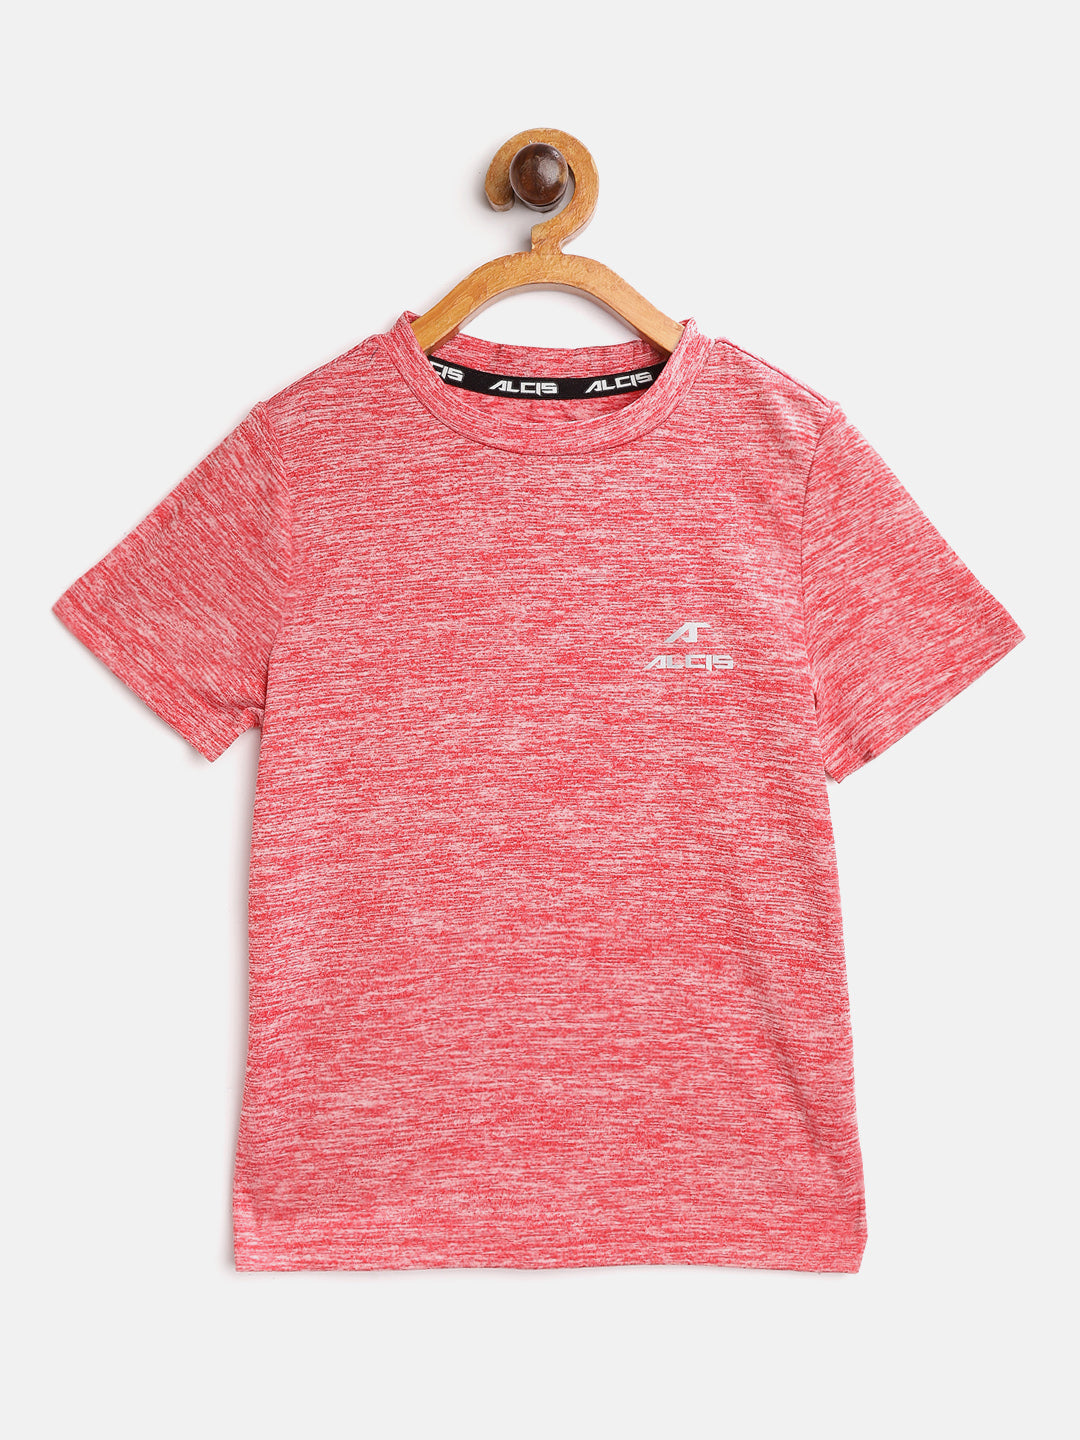 Alcis Boys Red Solid Round Neck T-shirt BTE8053-4Y